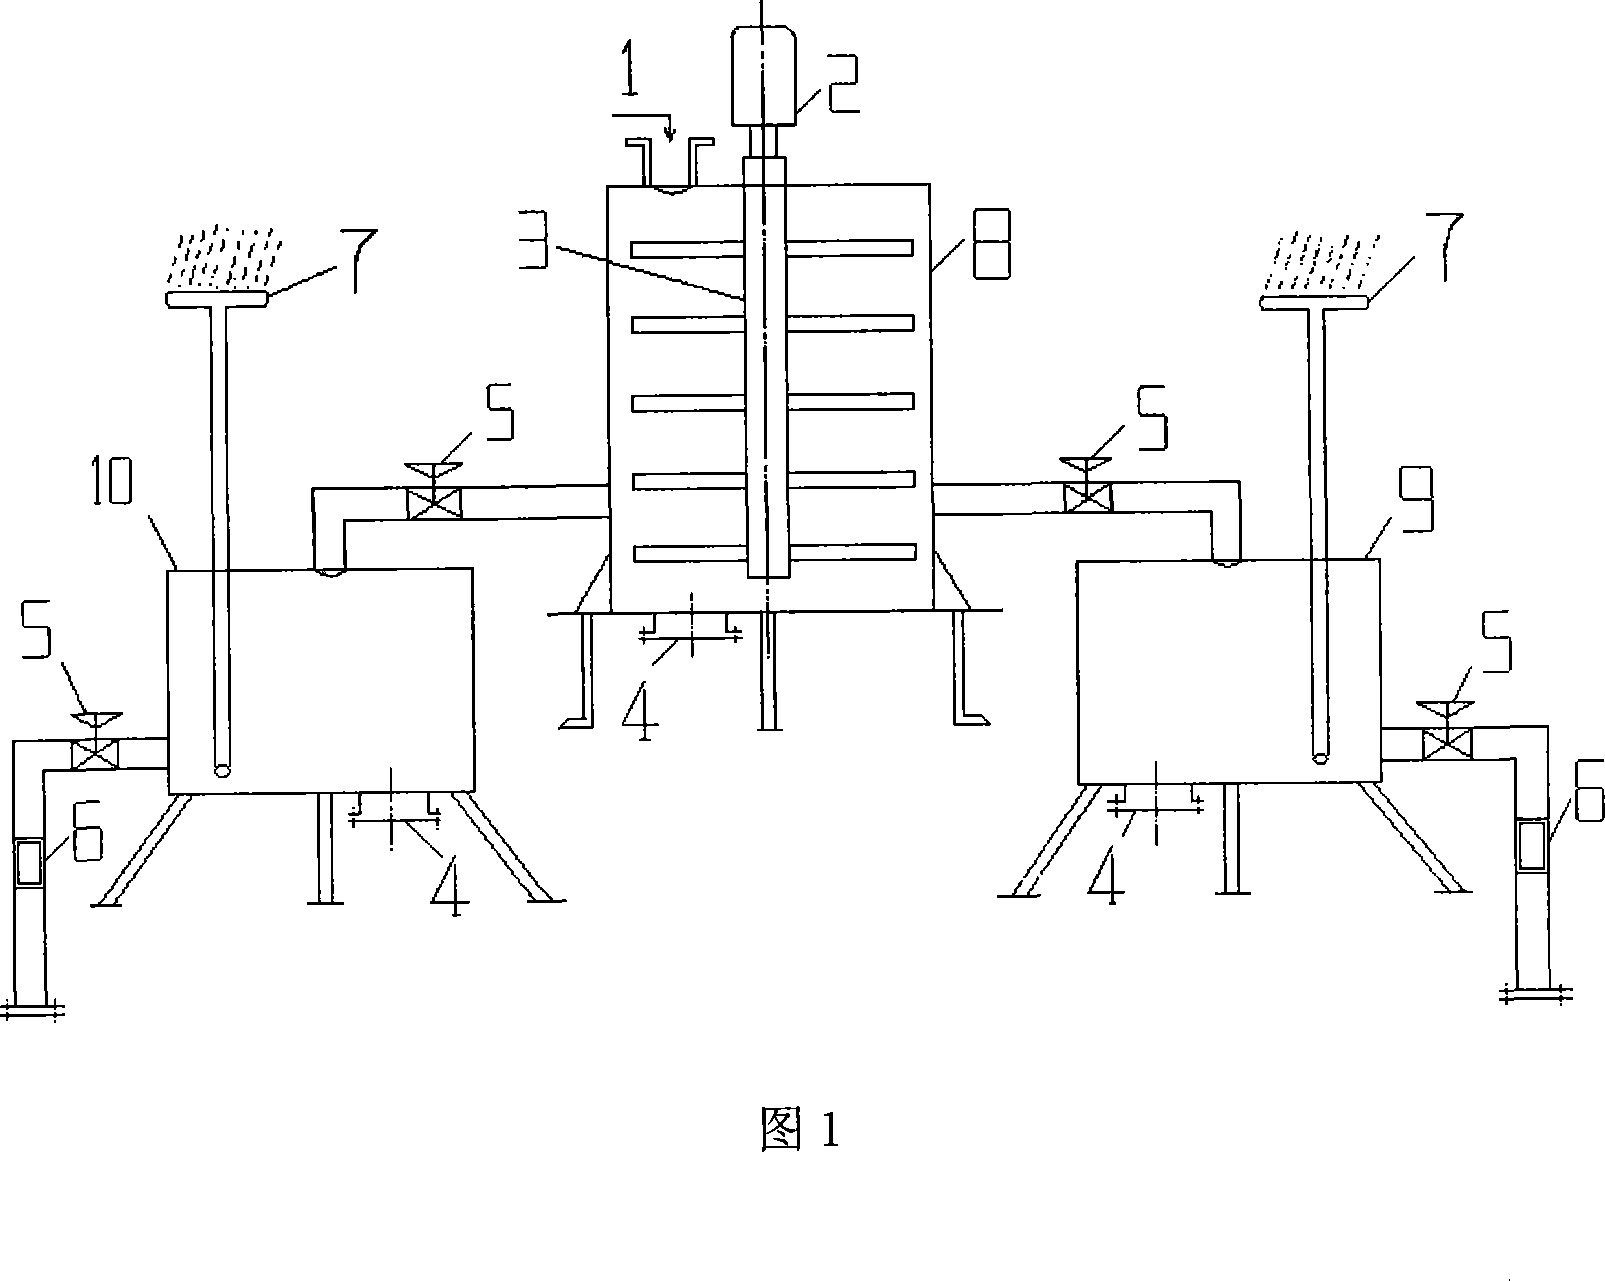 Blast-furnace coke colloid composite anticatalyst and spraying device